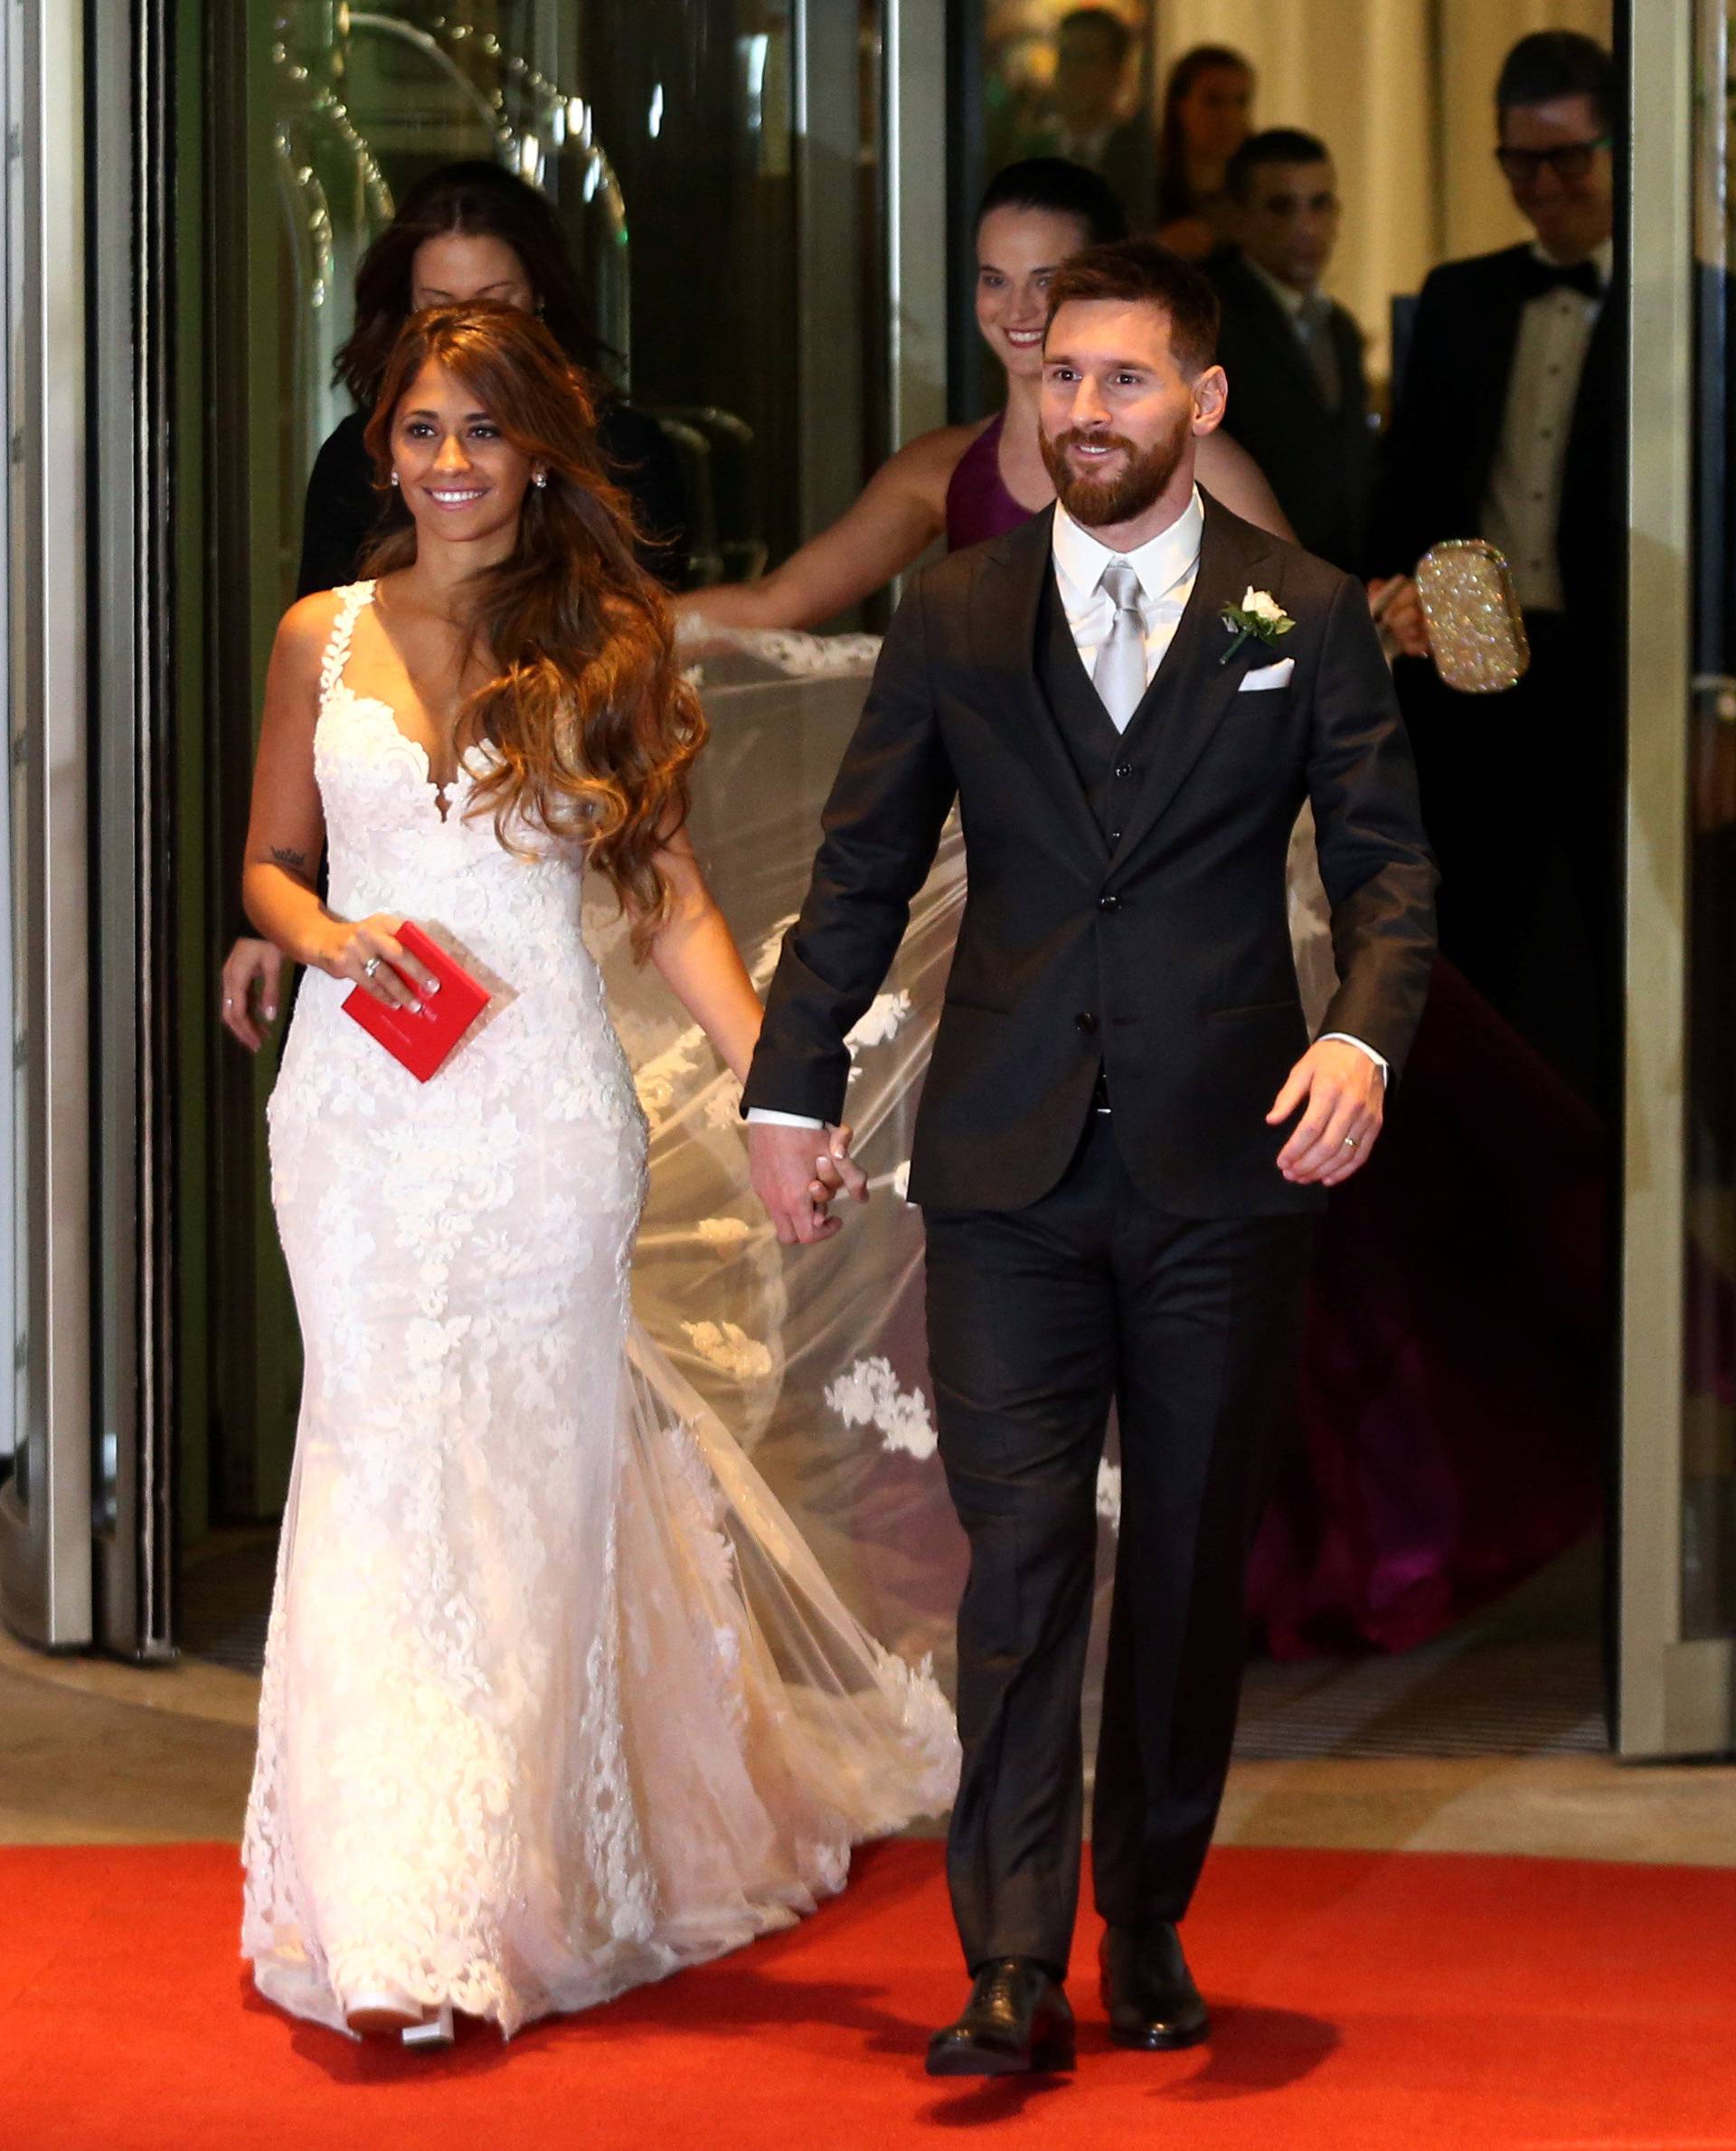 Argentine soccer player Lionel Messi and his wife Antonela Roccuzzo make an appearance for the press at their wedding in Rosario